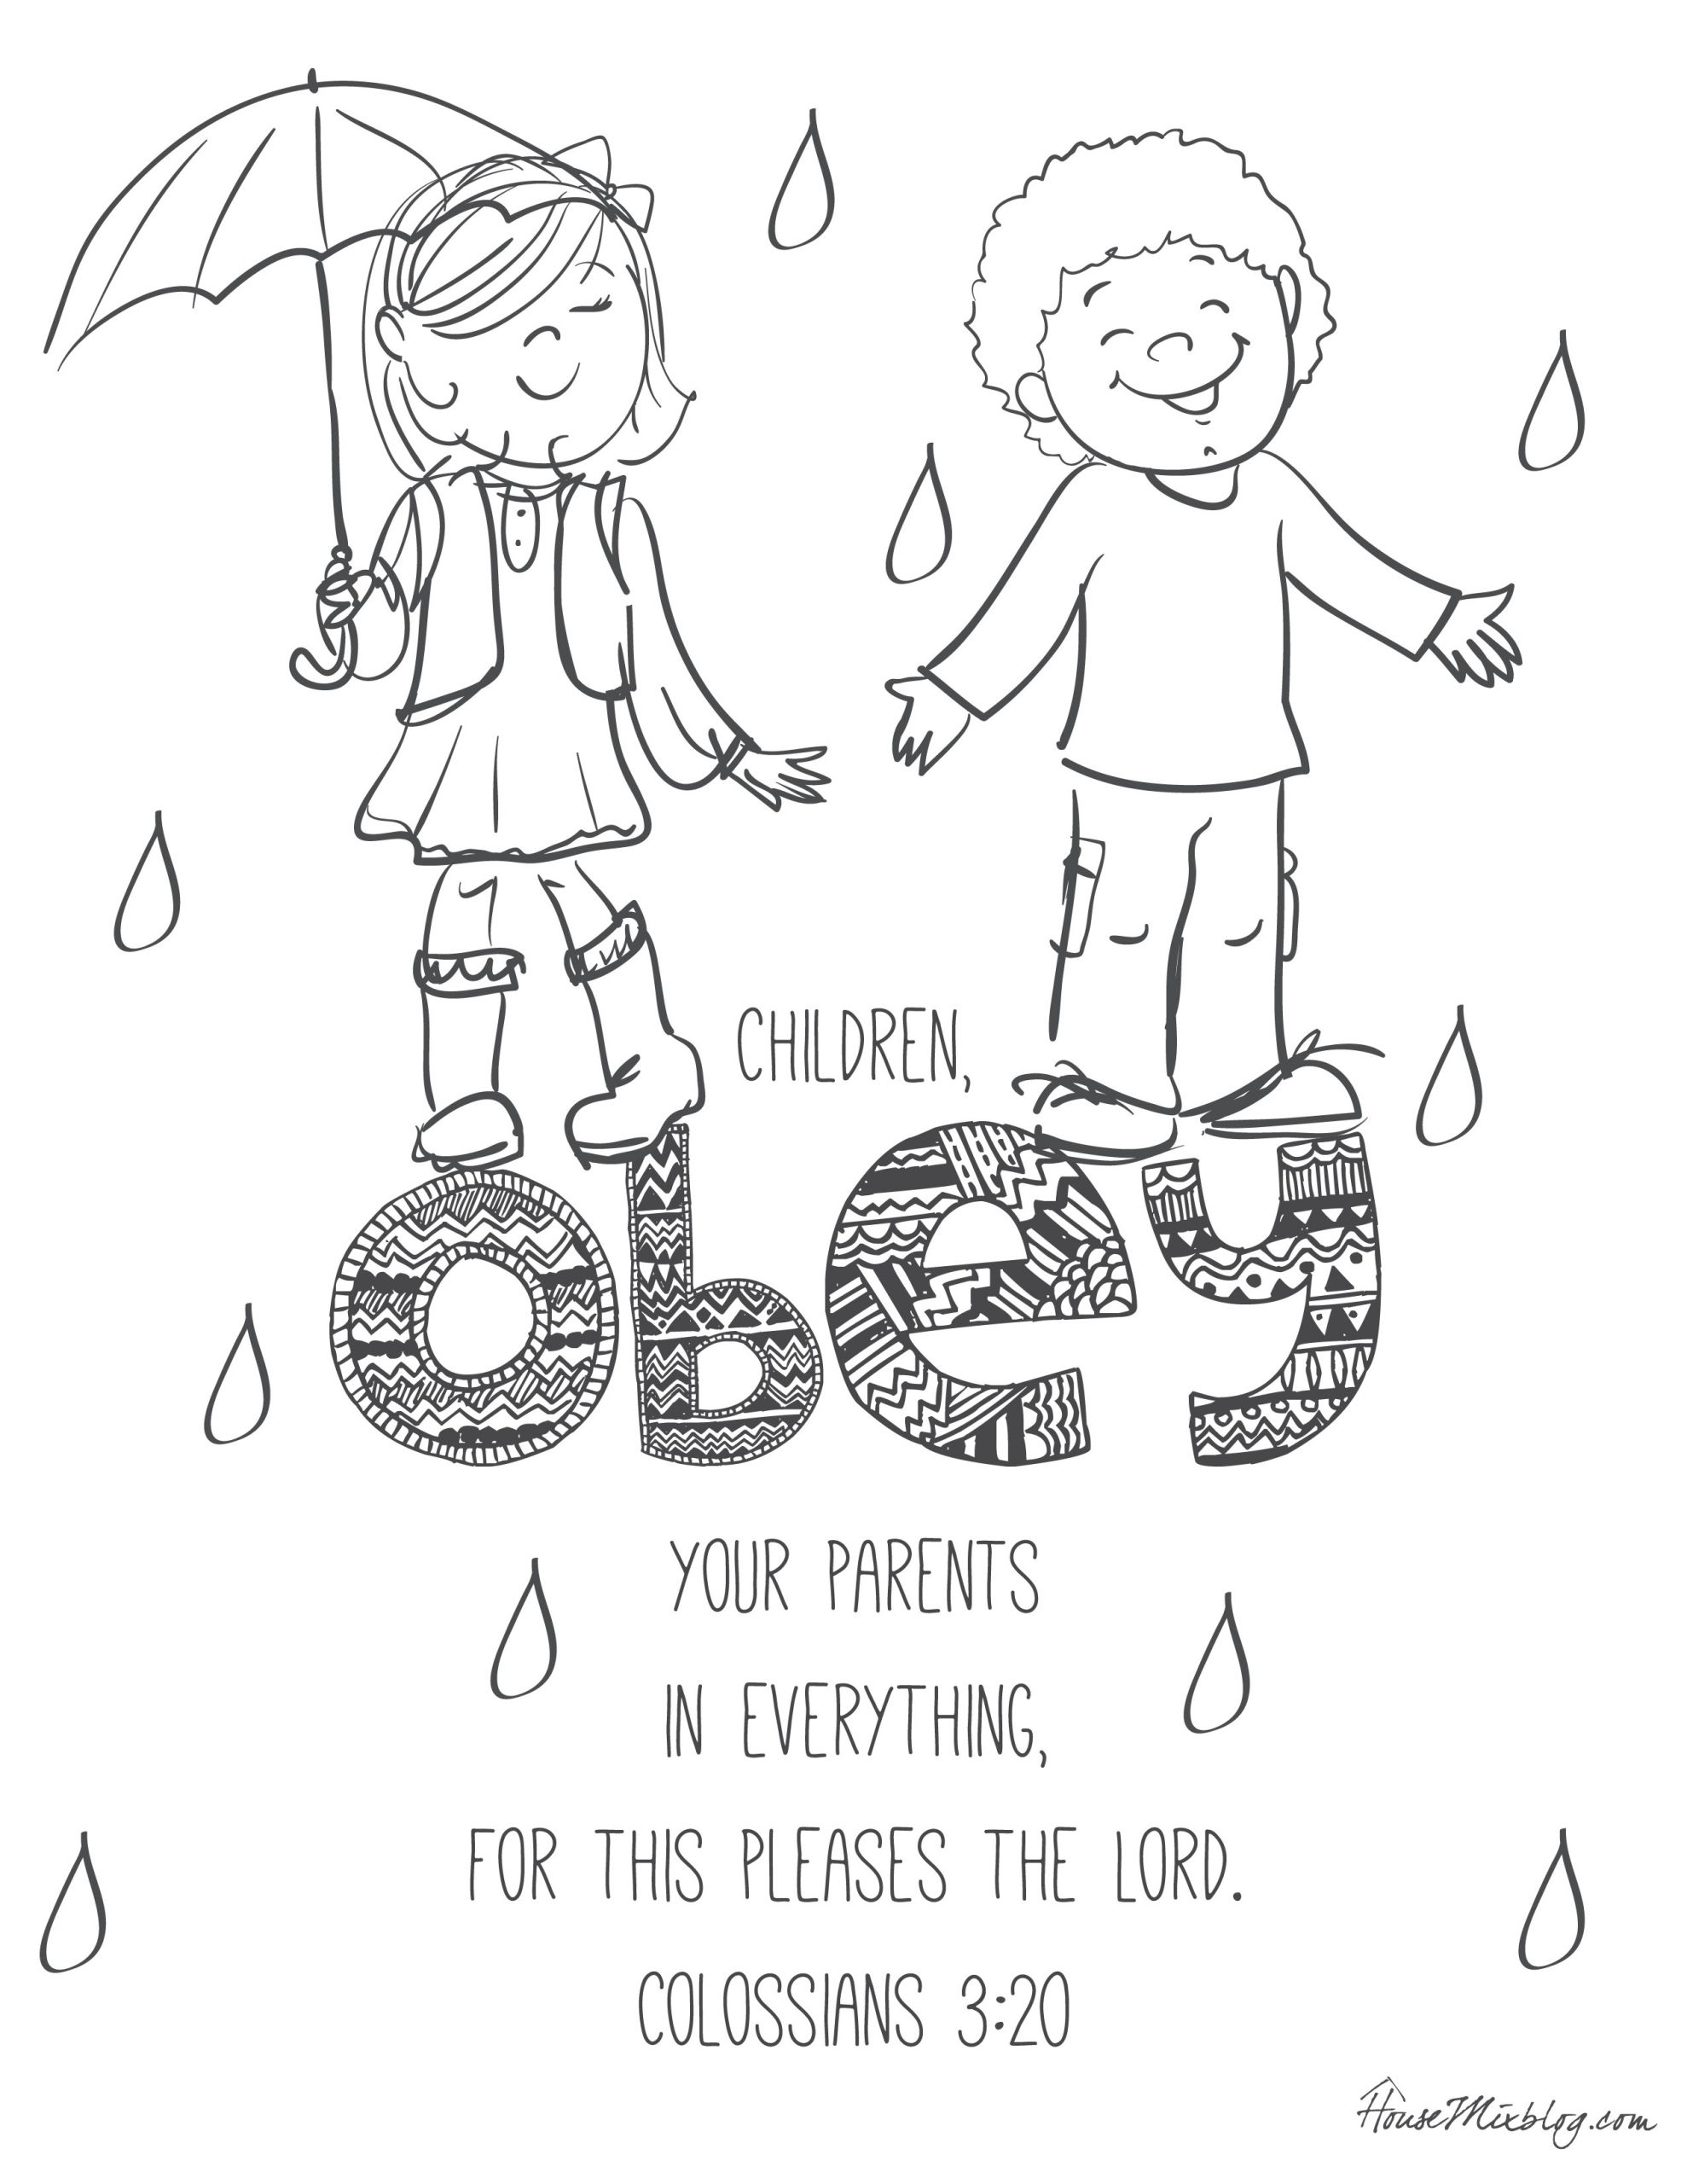 Bible Coloring Pages For Kids With Verses
 11 Bible verses to teach kids with printables to color